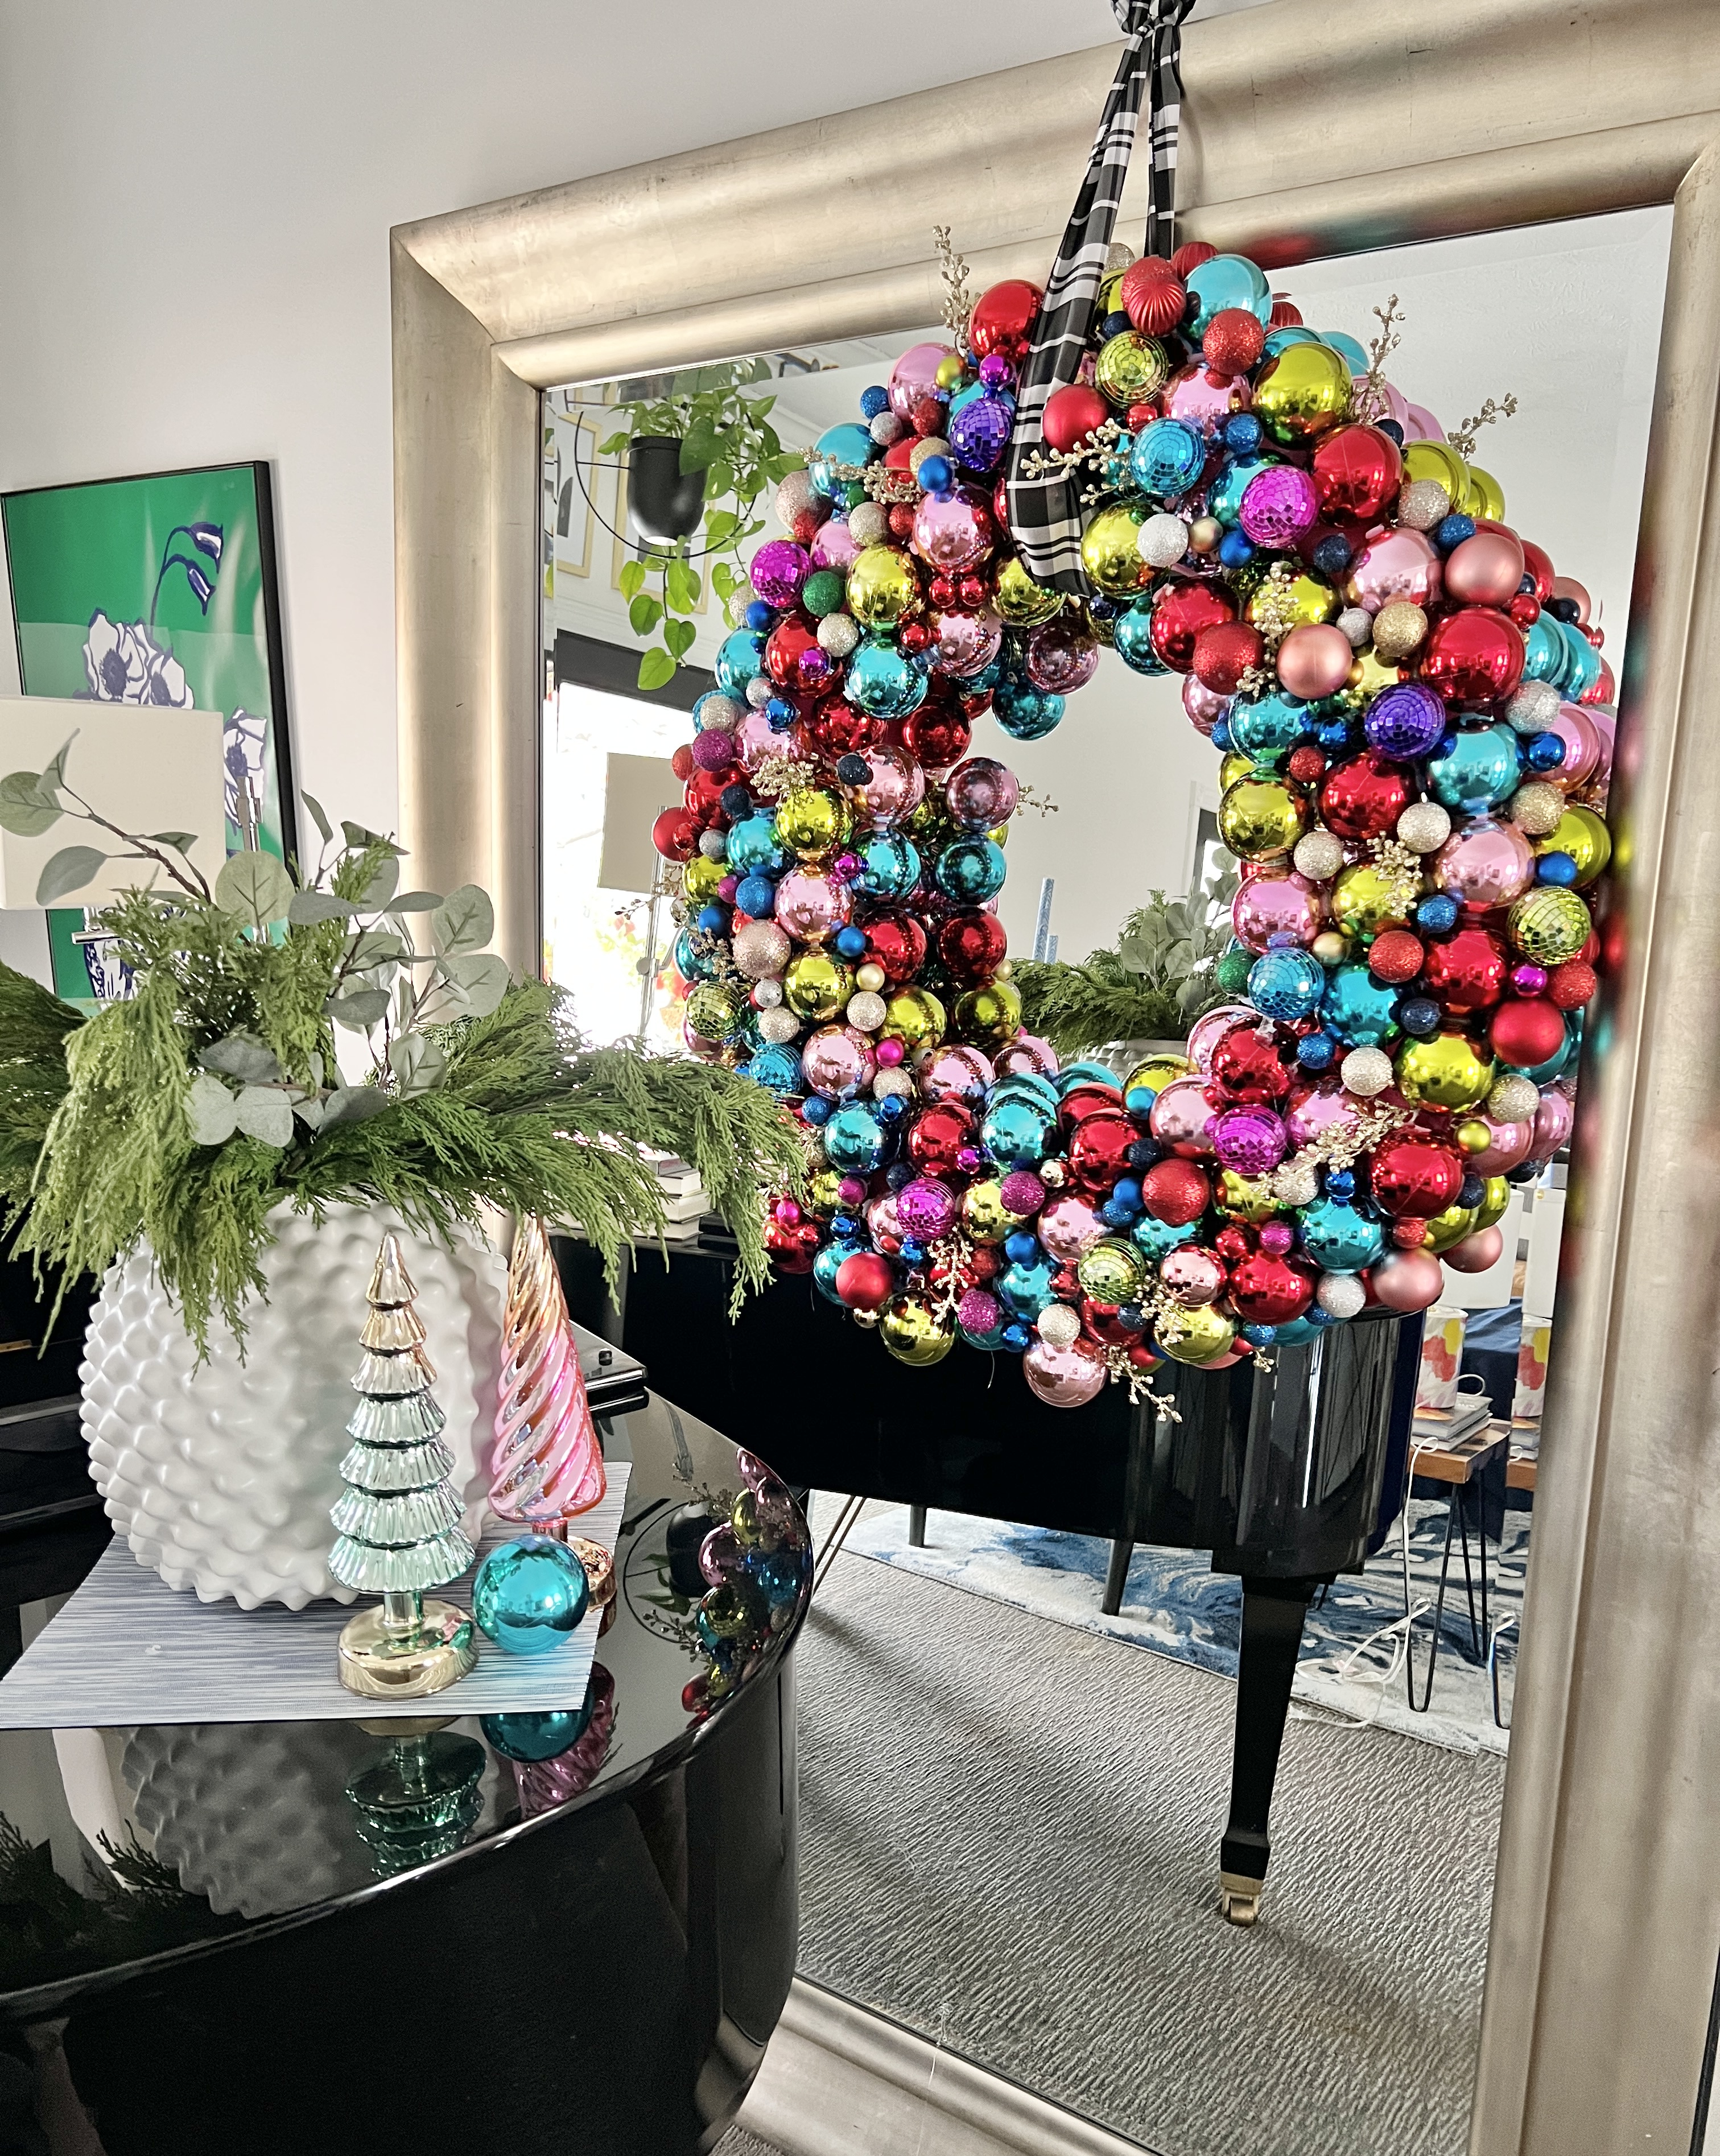 A Christmas wreath displayed on a large mirror.